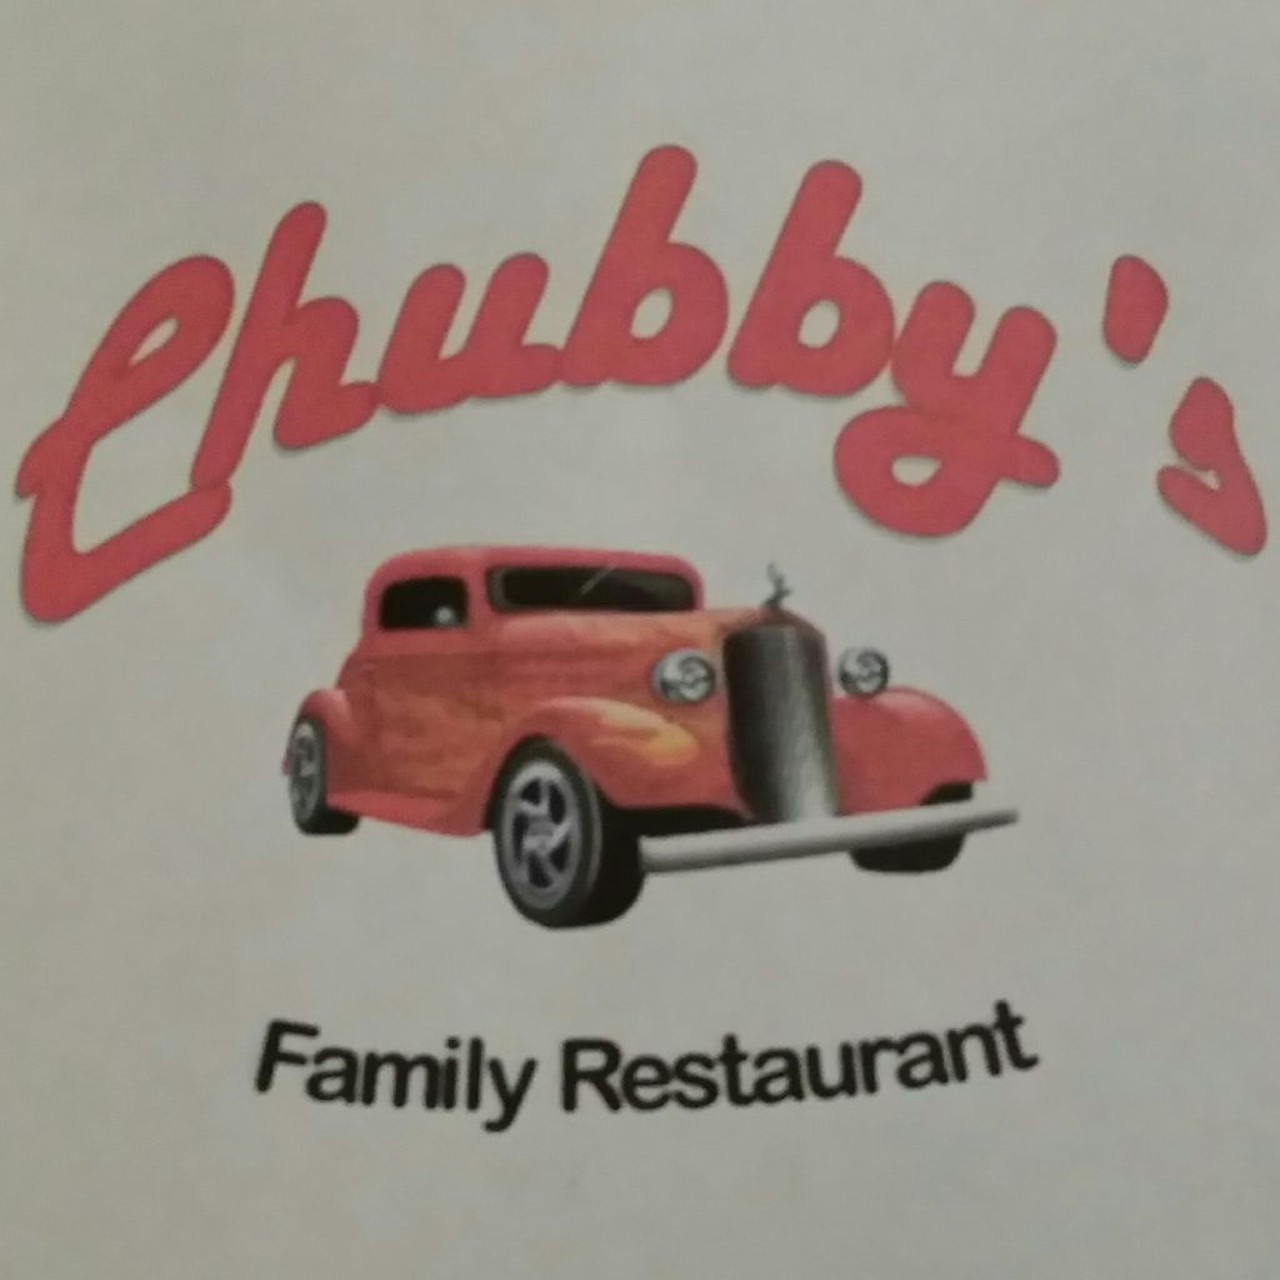 Chubby&#146;s Family Restaurant 
10376 E Colonial Drive
As the entire culinary world has coifed itself for the sake of Instagram and the price of everything has risen drastically, we&#146;ve lost the sort of low-end places that exist to serve good food at decent prices to hard-working people. Luckily, Chubby&#146;s holds on along E. Colonial, serving up gutbusting breakfasts every single day.
Photo via Chubby&#146;s Family Restaurant /Facebook